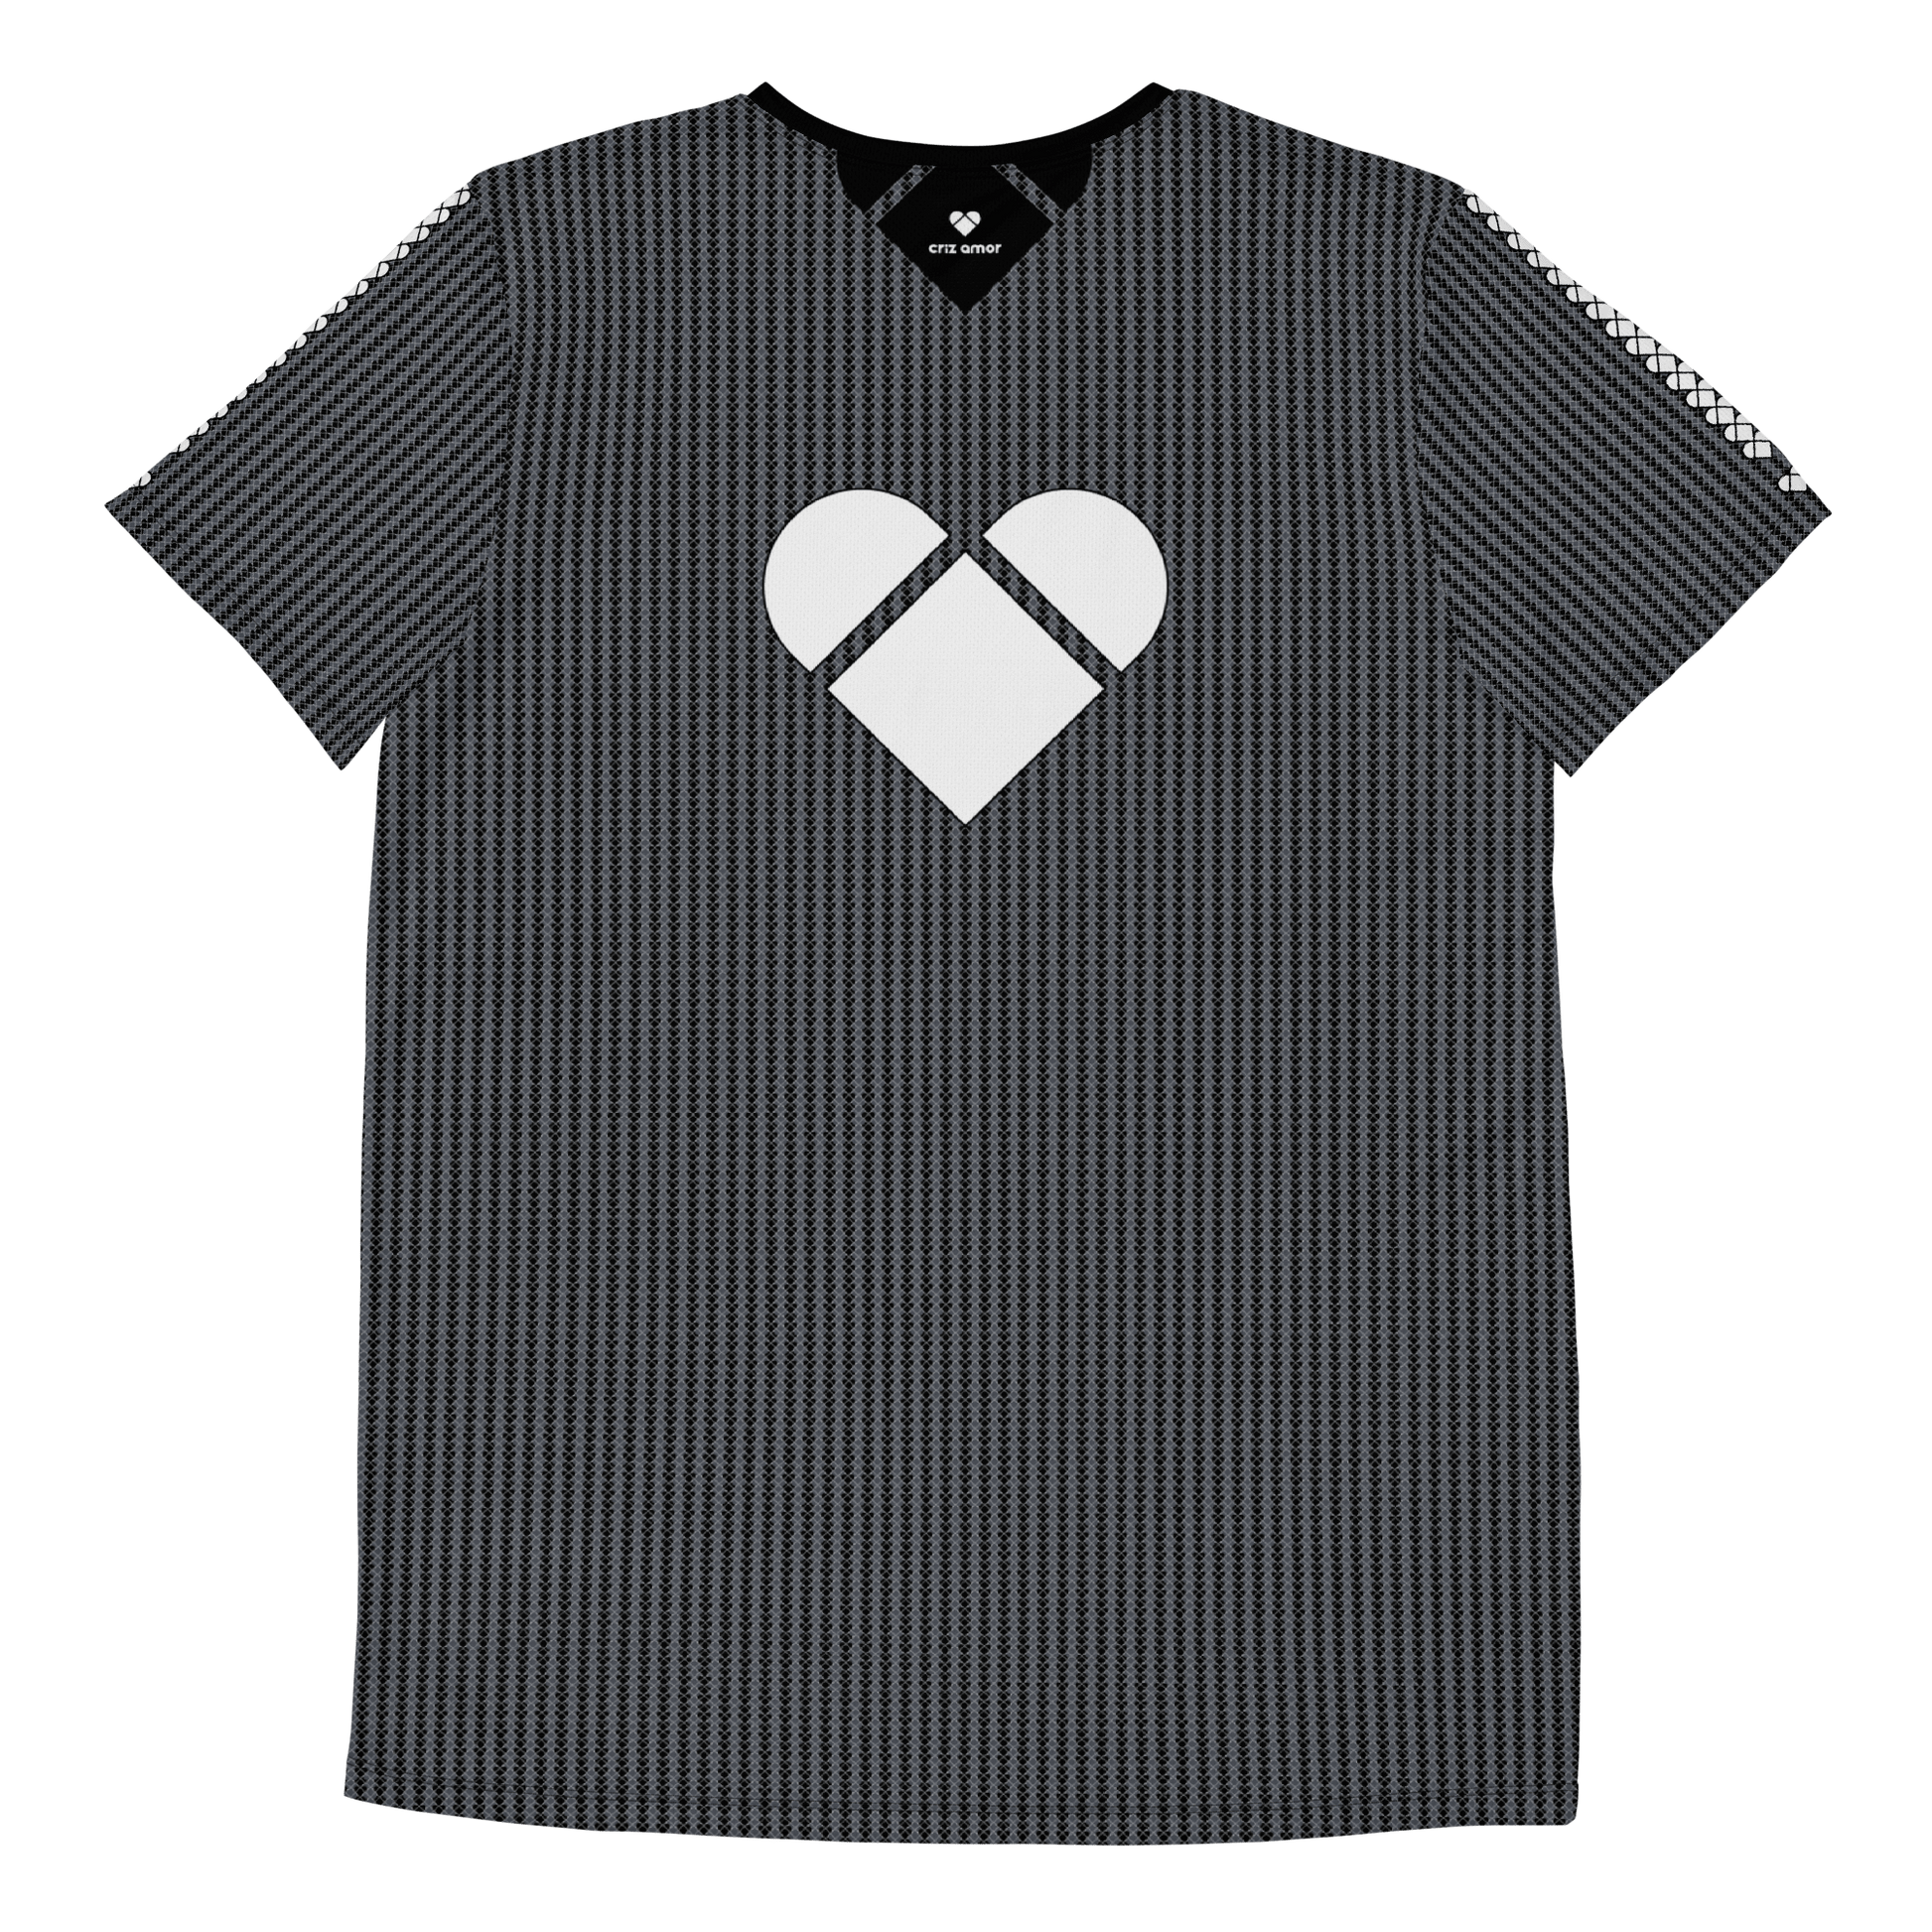 Men's black sport shirt with a playful touch - white heart logo stripe on the sleeves and big white heart on the back. Amor Primero capsule collection from CRiZ AMOR